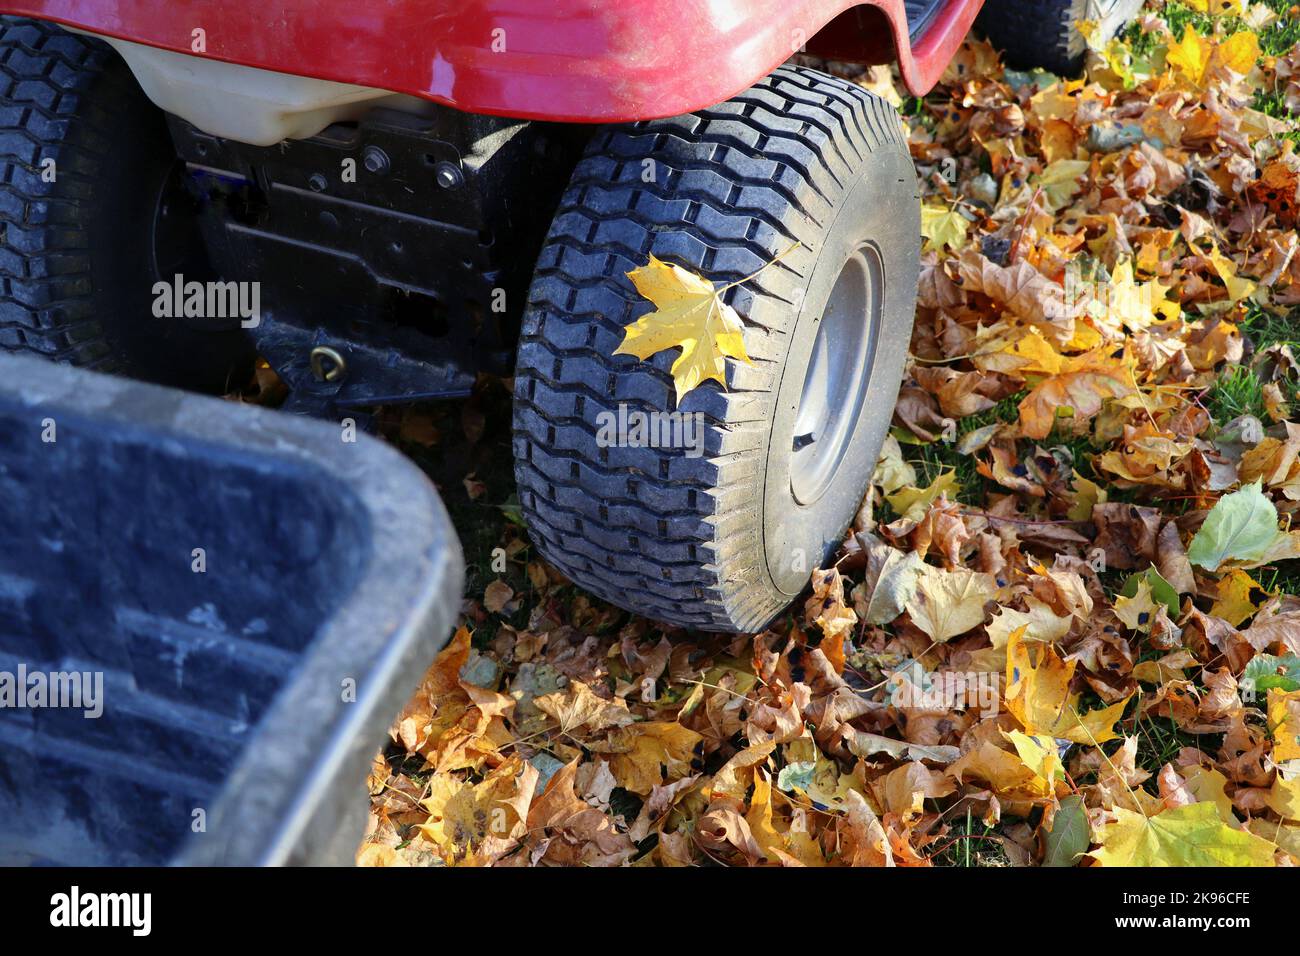 Riding lawn mower with big container in garden. Concept gardening, mowing, work at outside in autumn Stock Photo